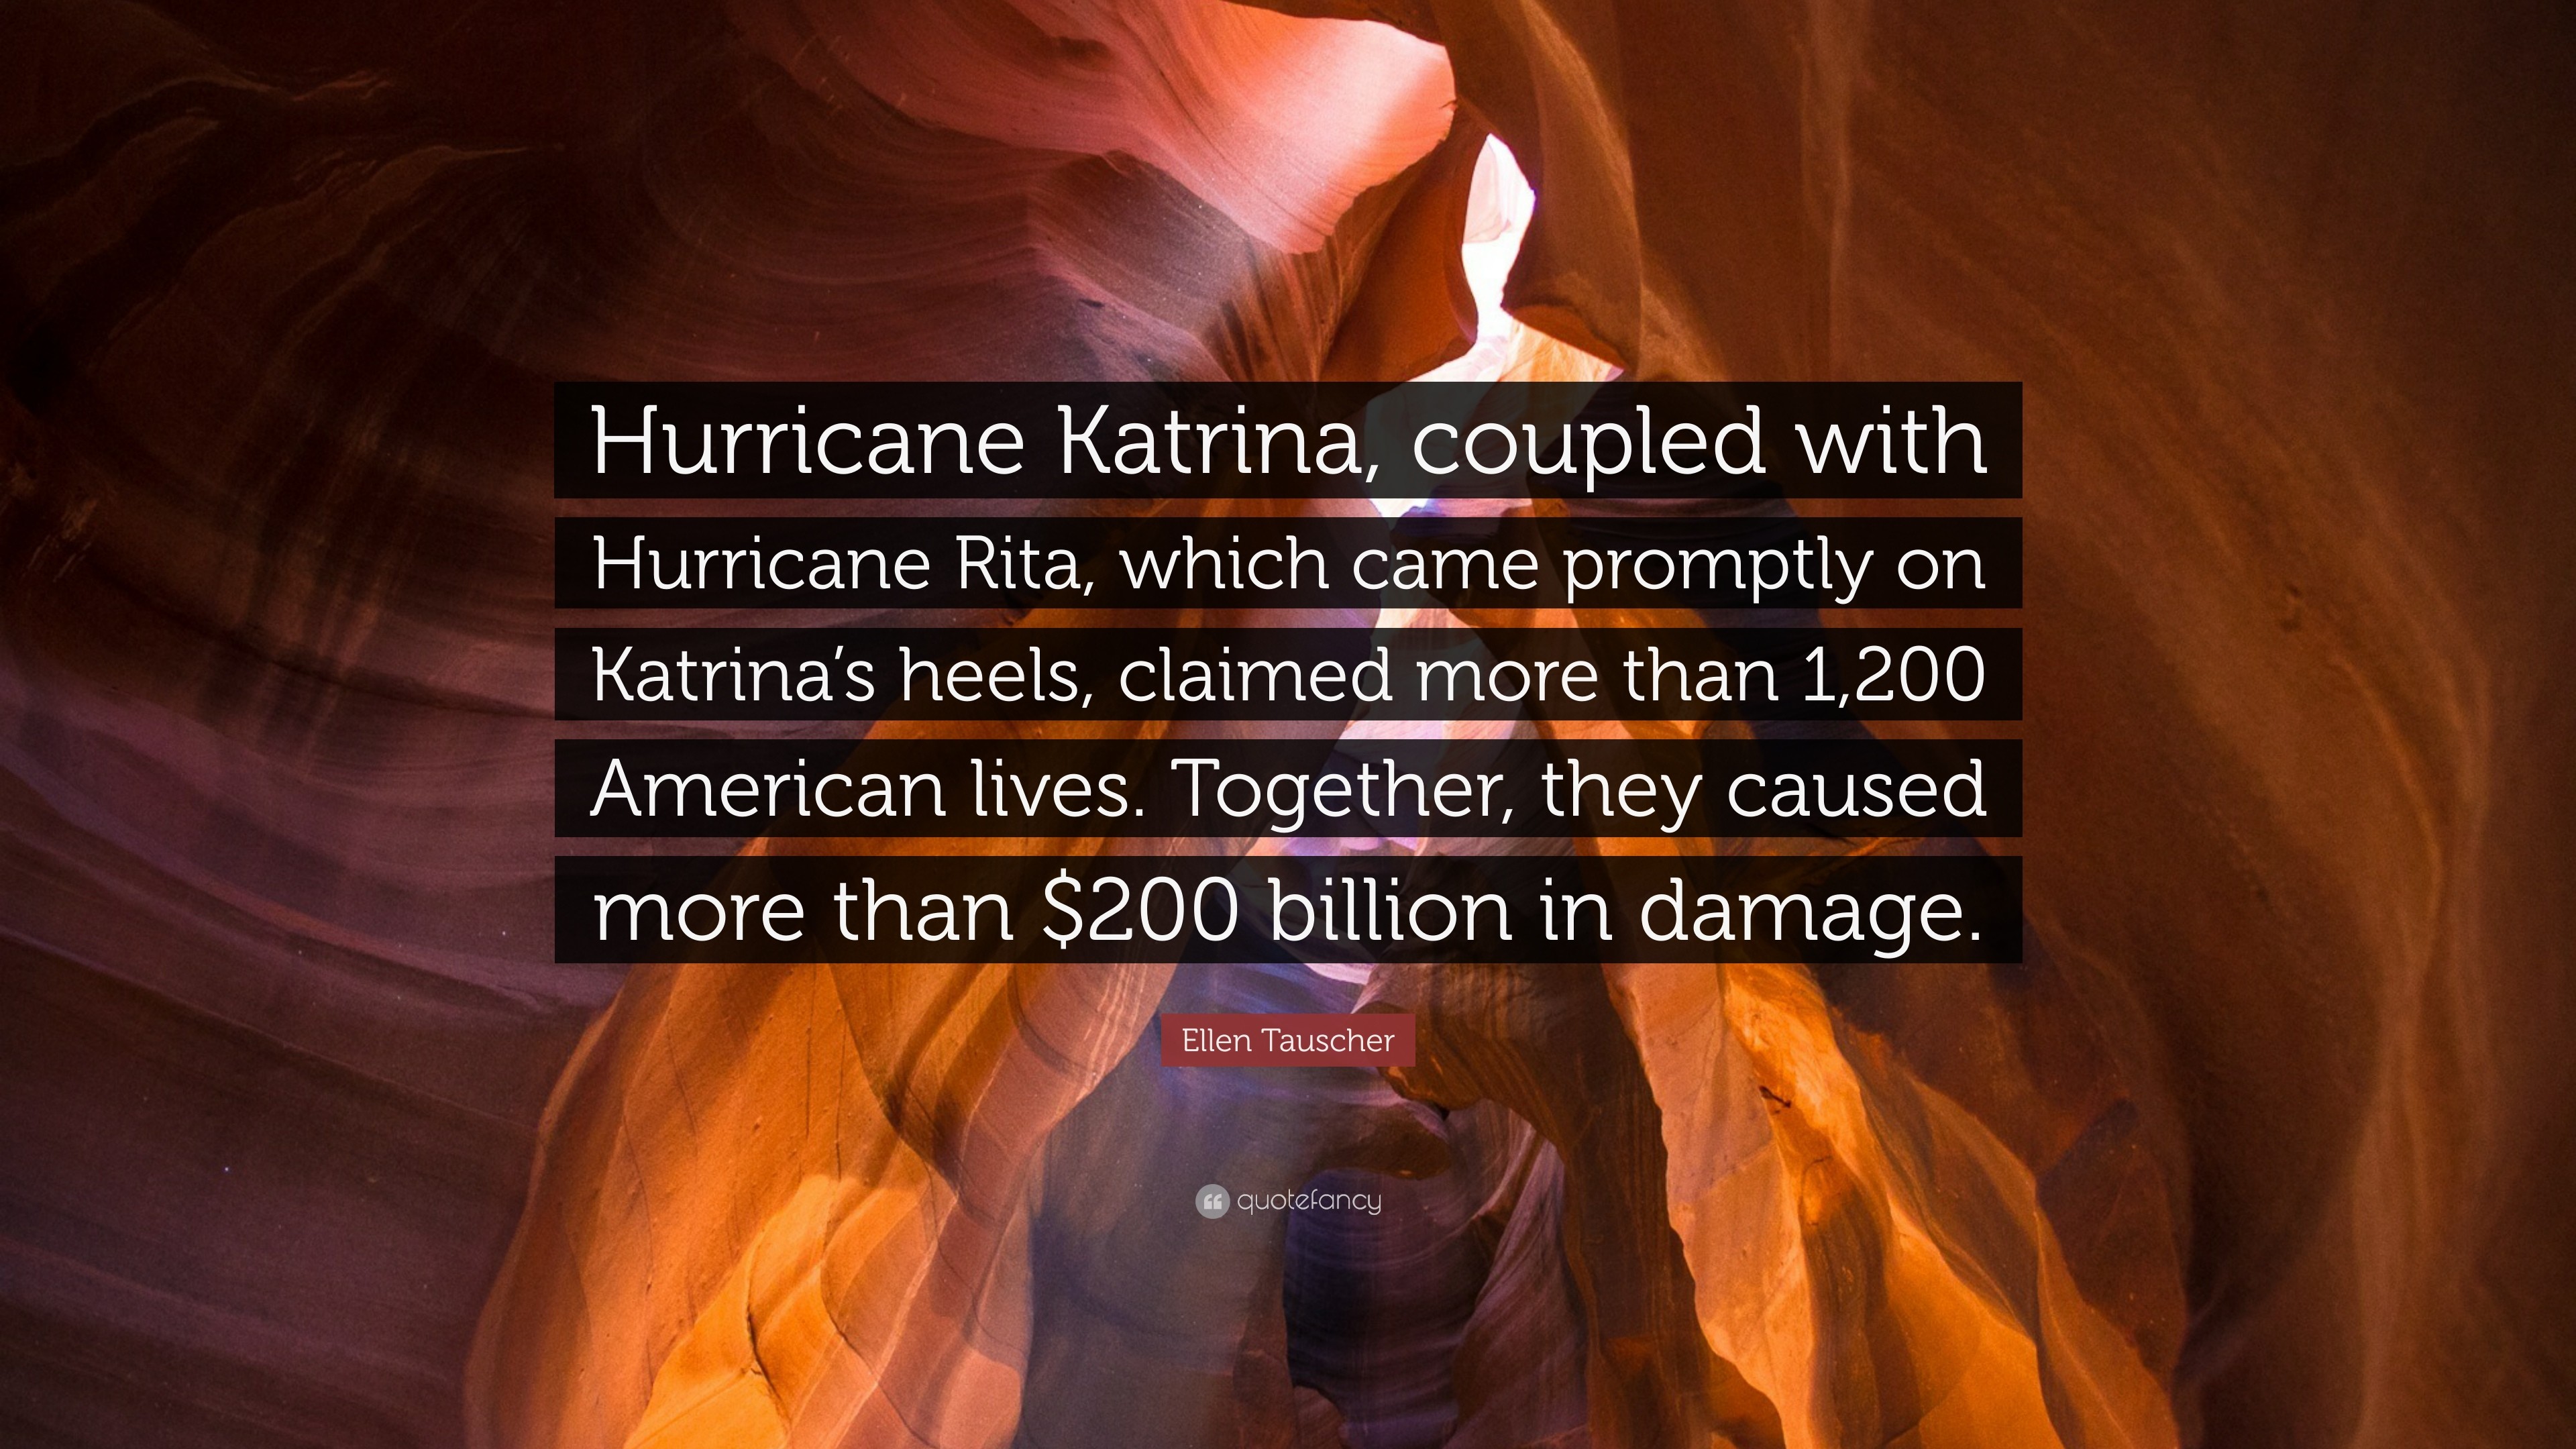 3840x2160 Ellen Tauscher Quote: “Hurricane Katrina, coupled with Hurricane Rita,  which came promptly